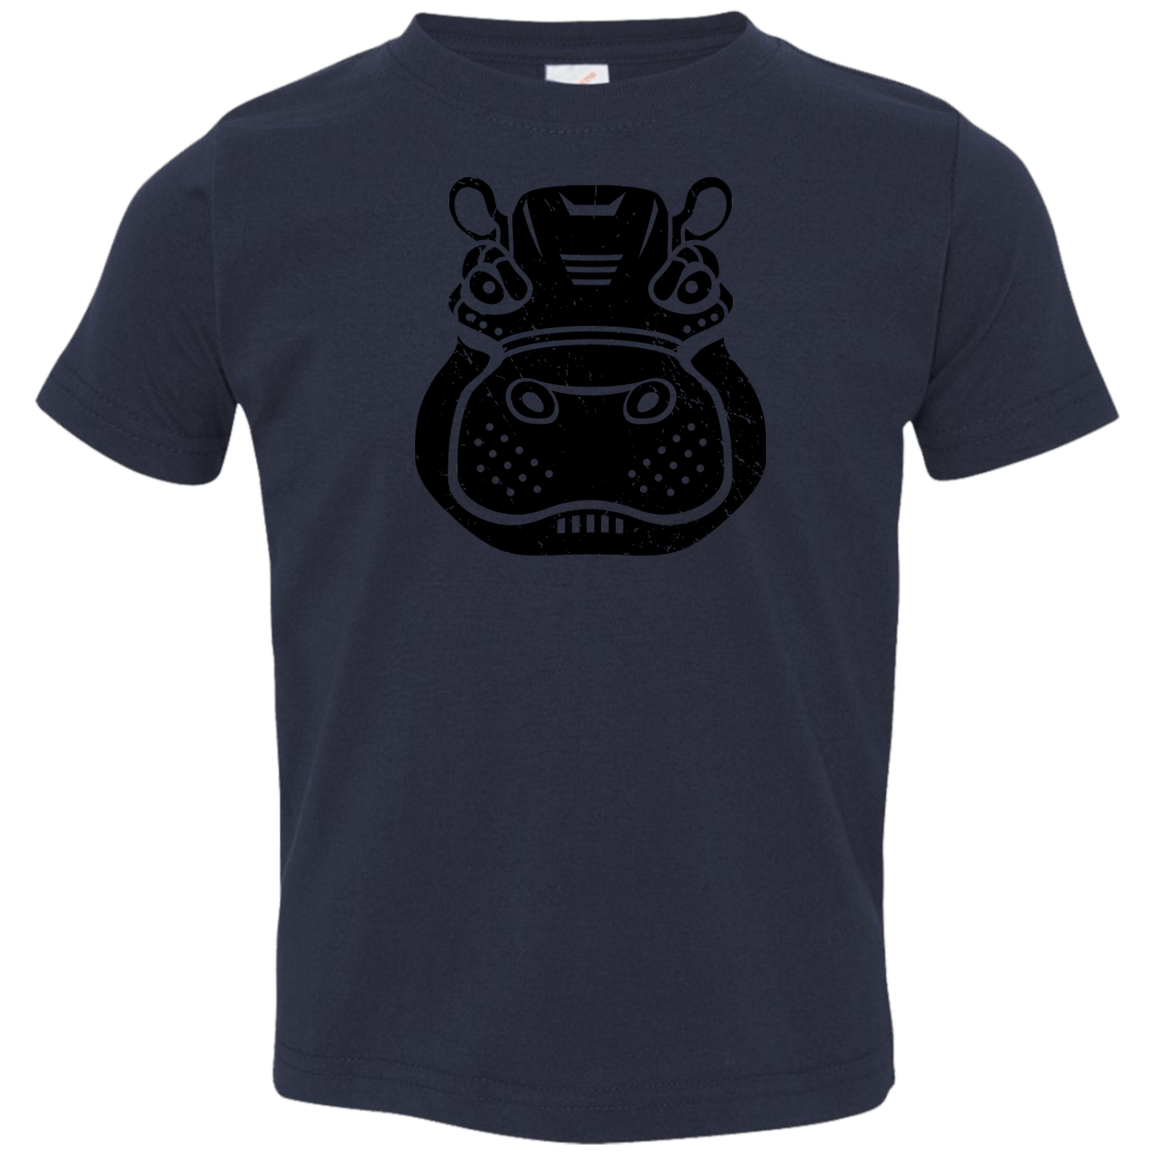 Black Distressed Emblem T-Shirt for Toddlers (Hippo/Teal)